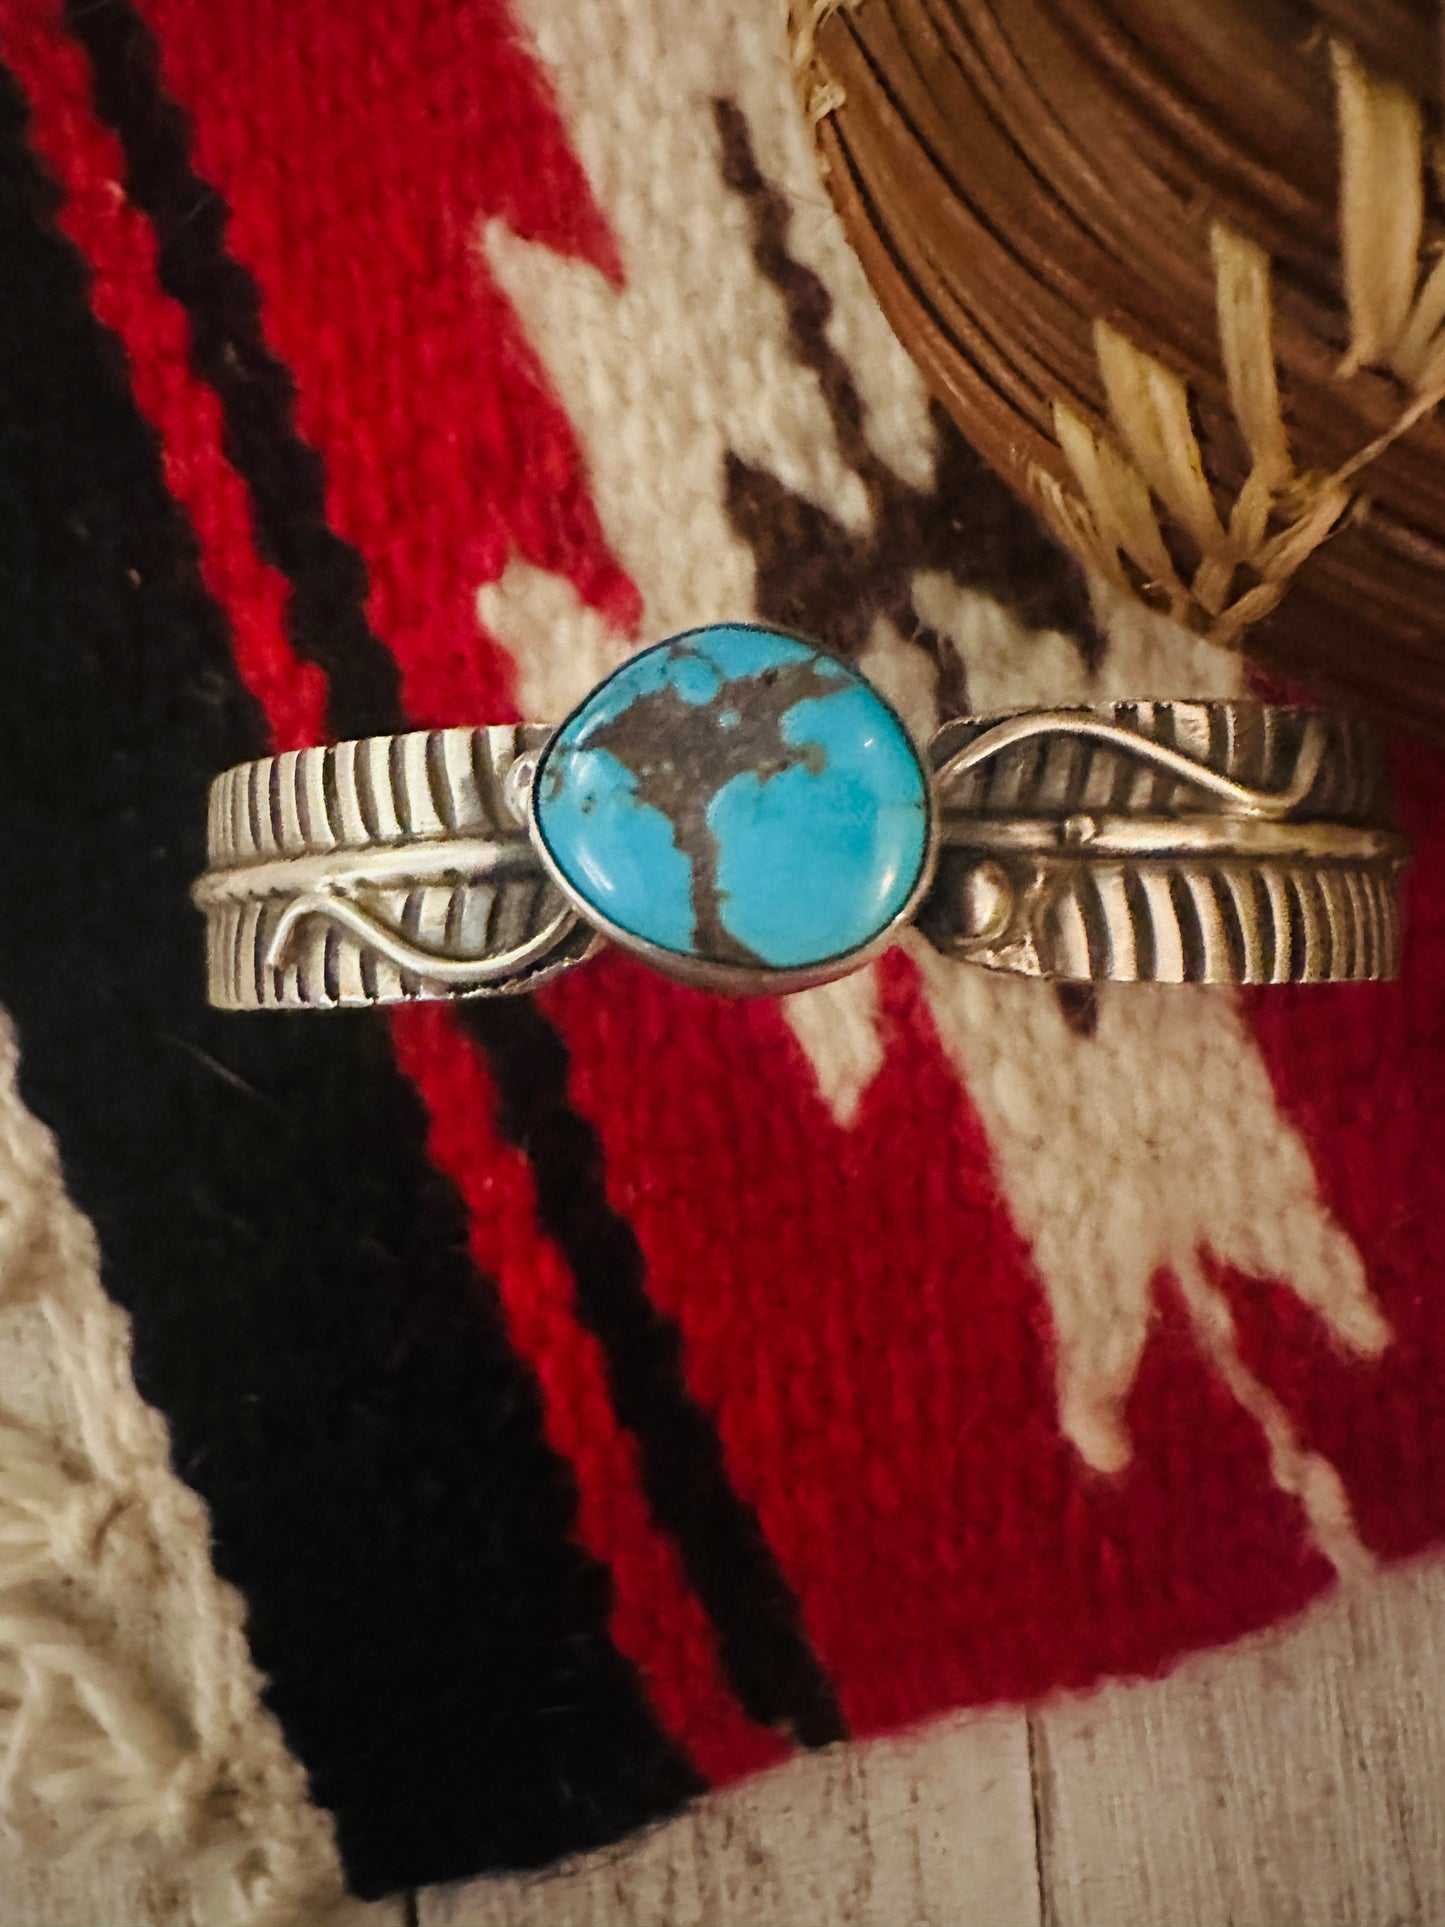 Navajo Turquoise & Sterling Silver Feather Cuff Bracelet